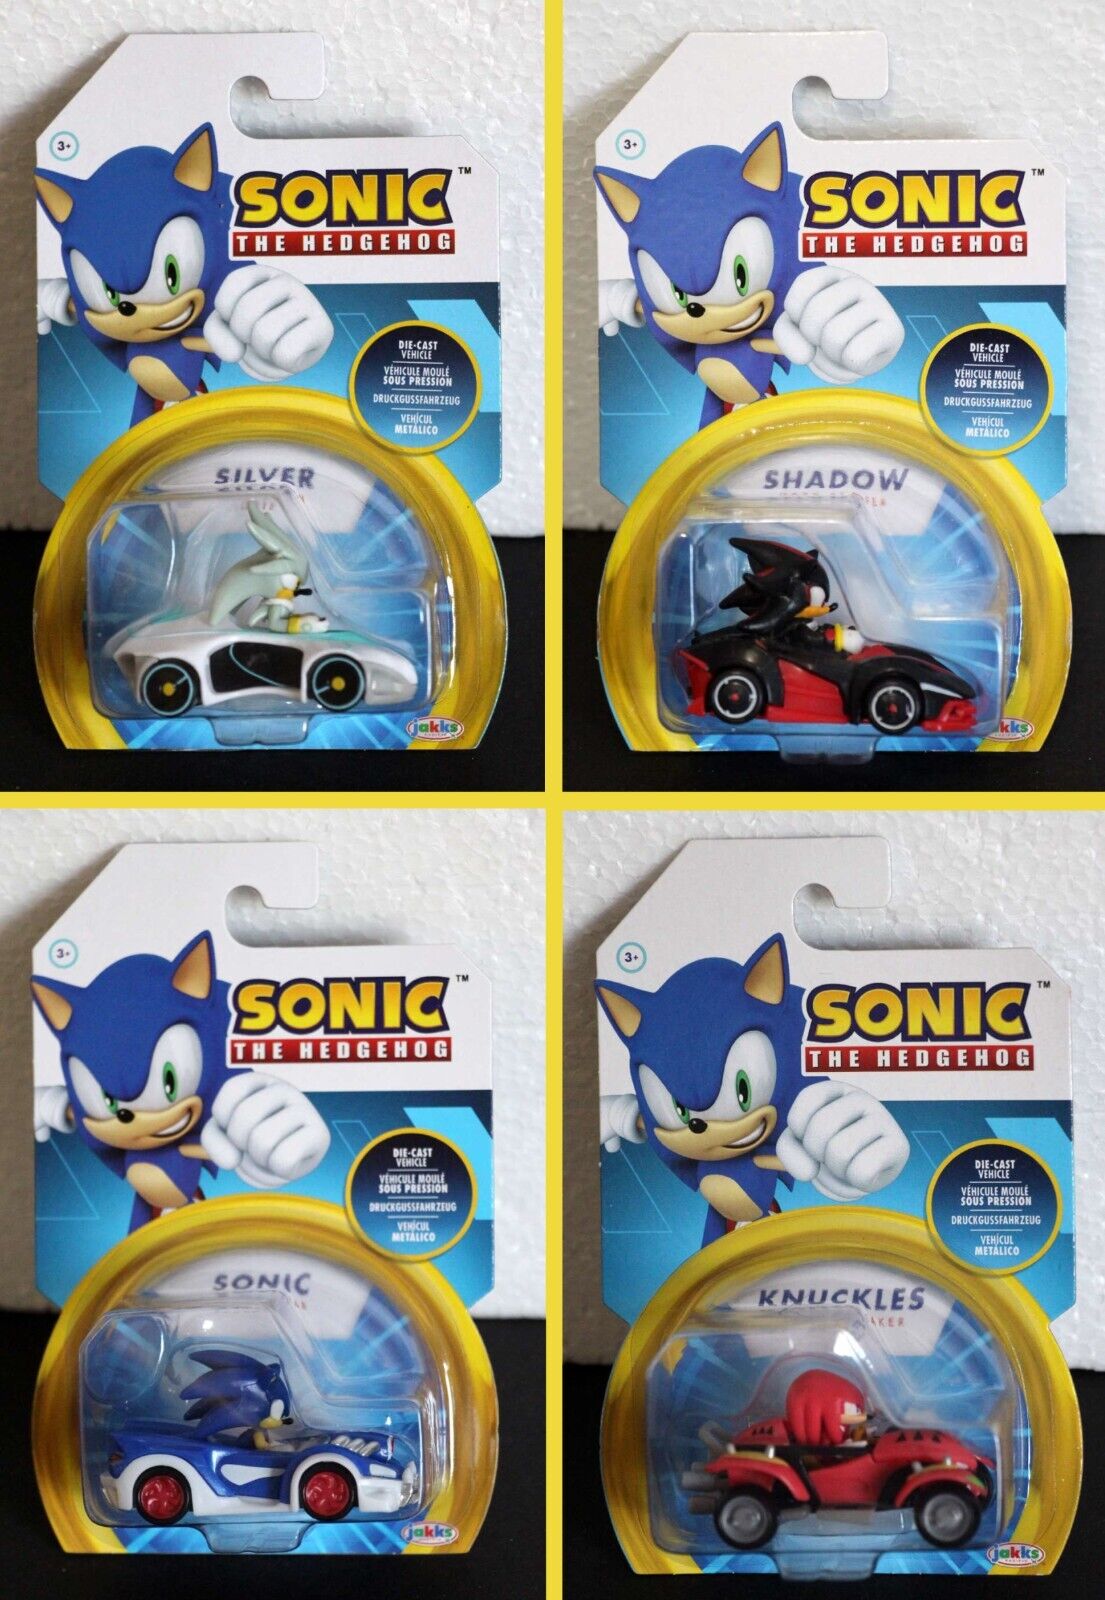 SONIC THE HEDGEHOG Shadow Silver & Knuckles Die-Cast Cars (SET of 4) NEW